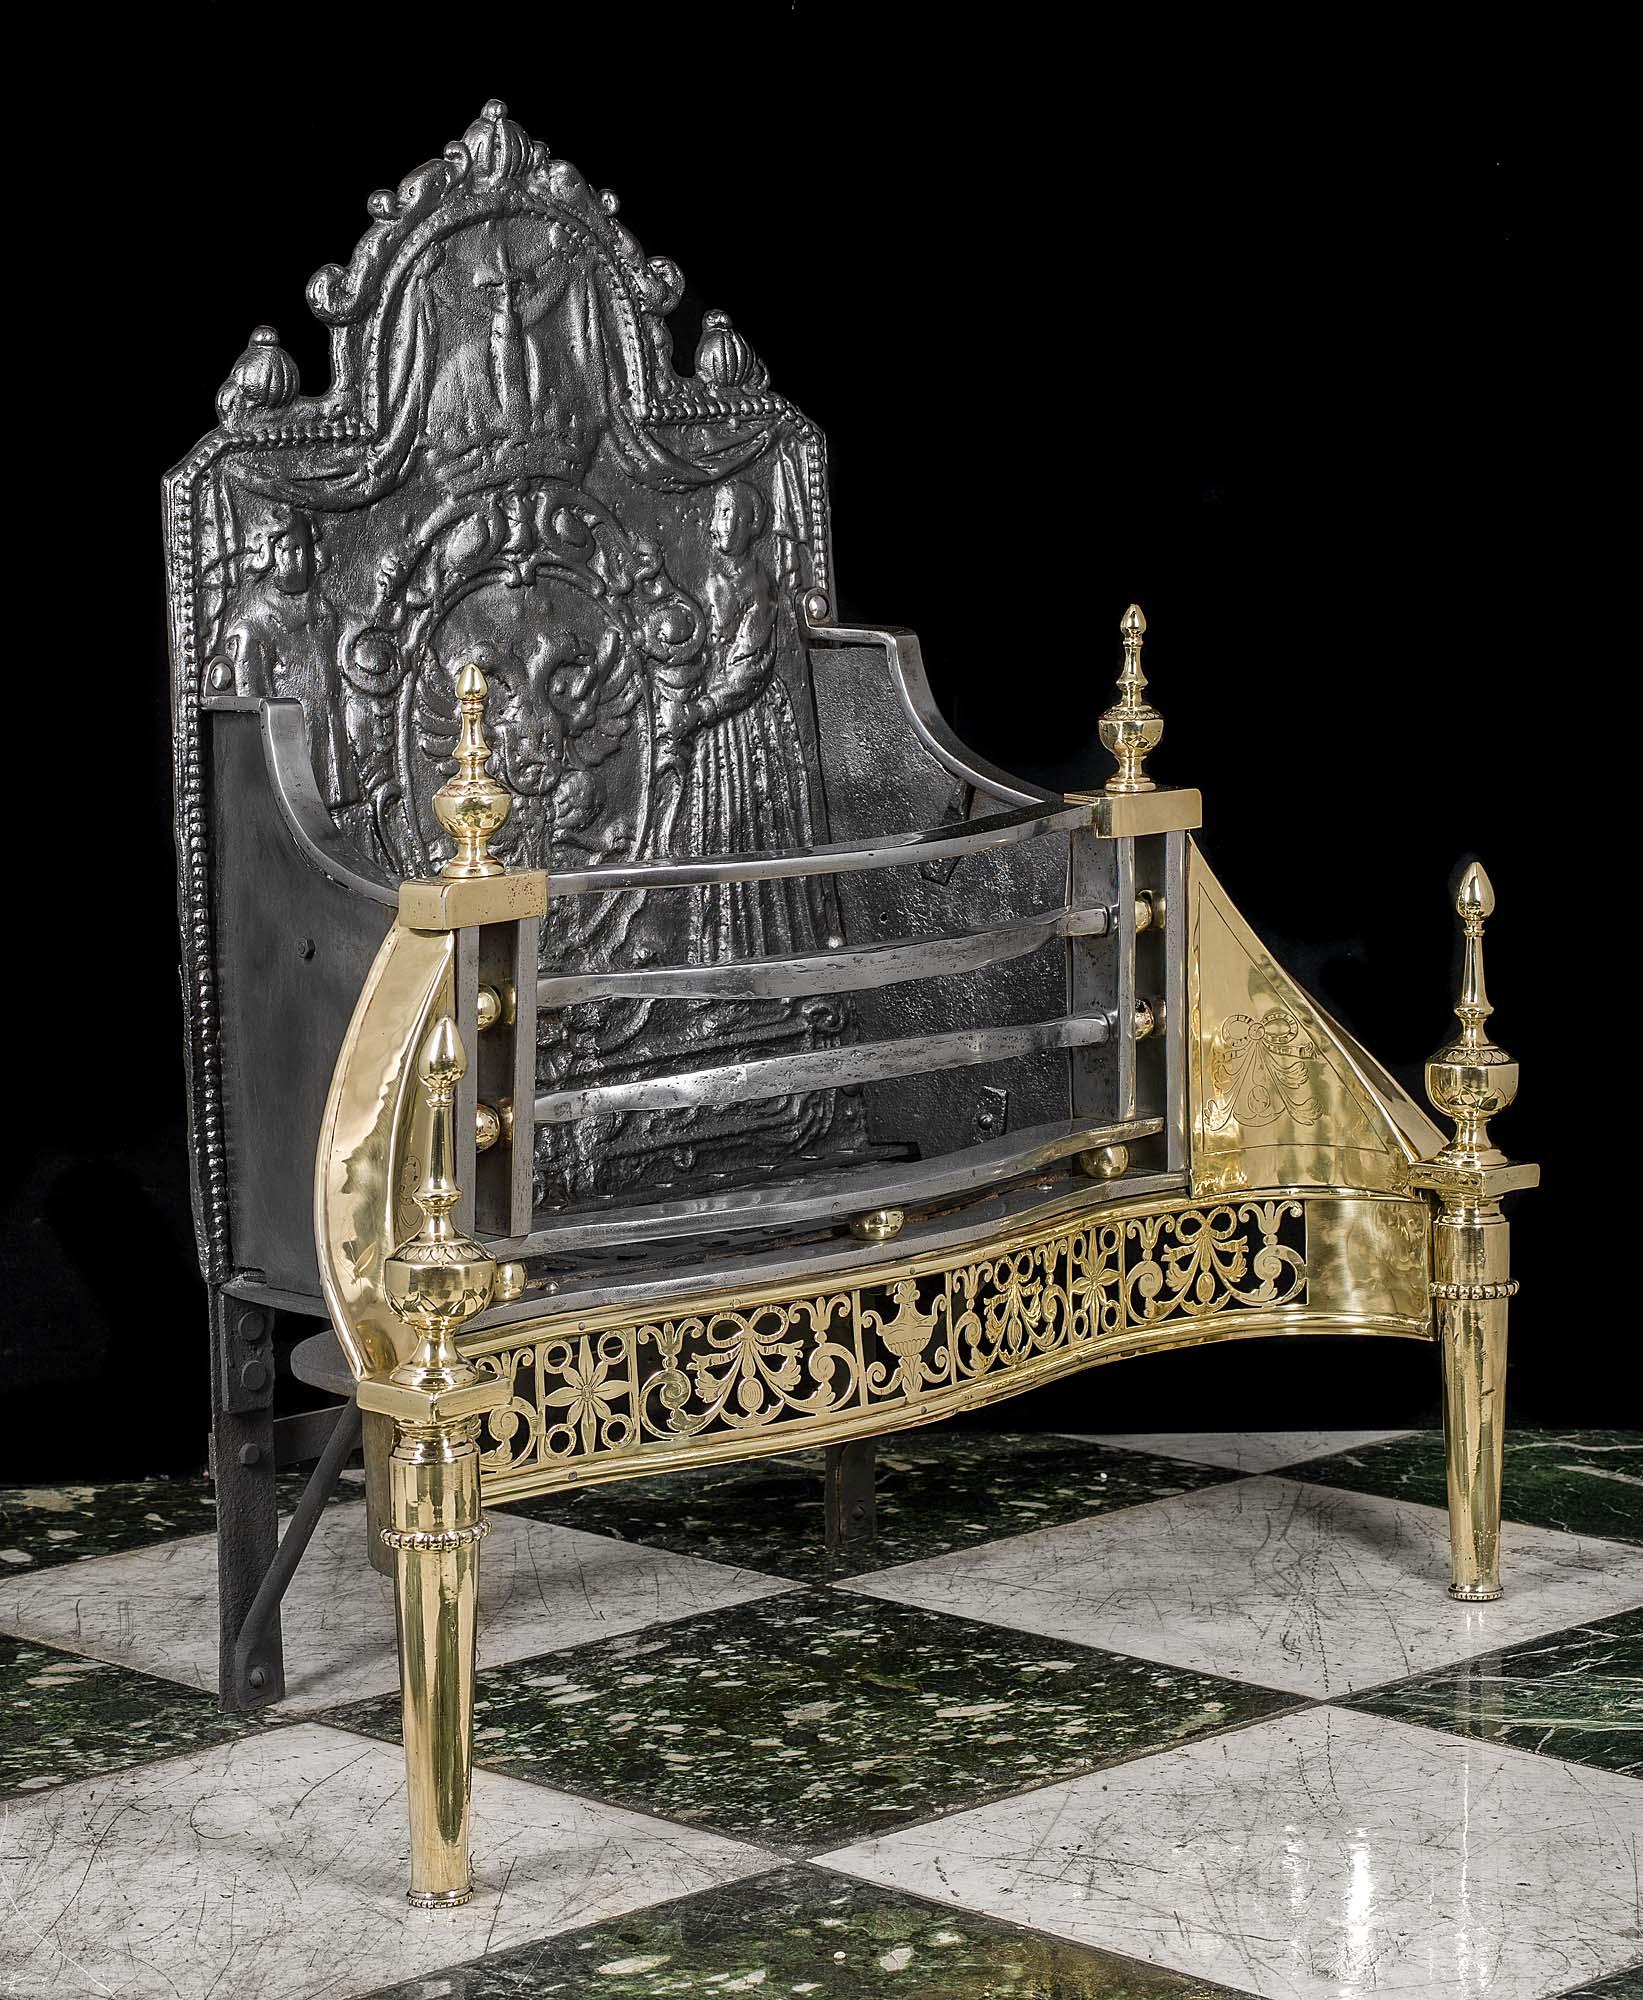 A fine brass and cast iron fire grate, in the George III style. The high shaped back with a central cartouche depicts a double headed eagle and shield, held by a man and a woman. The bars of the grate are elegantly bowed, and sit above a richly